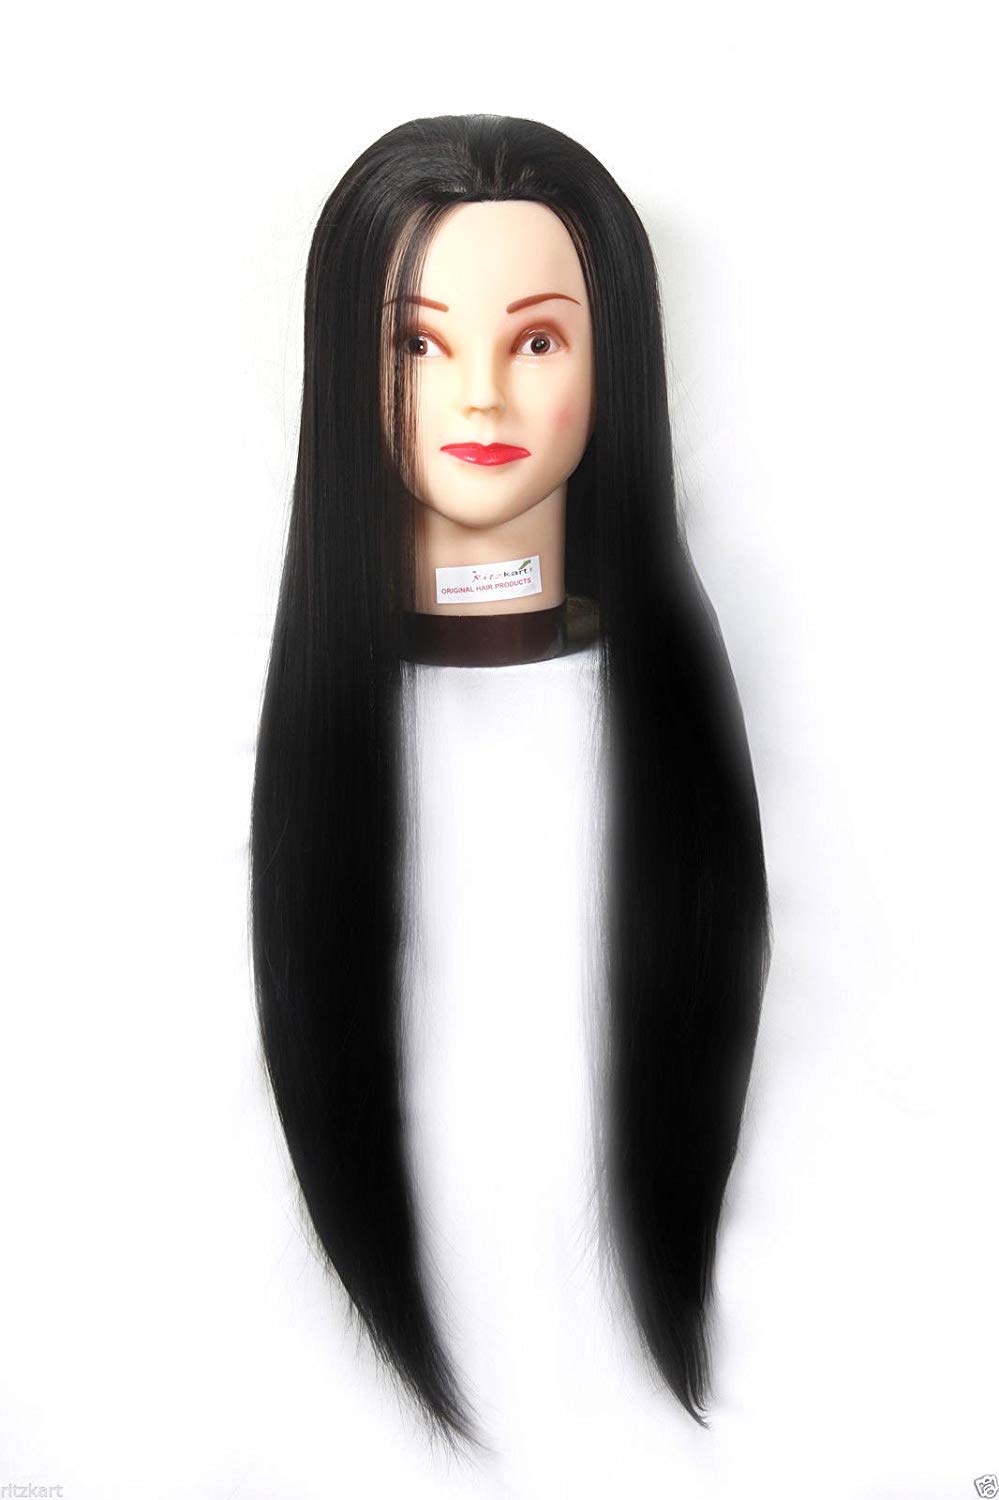 31 Inch Long & Straight Black Soft Hair Styling/Cutting, dummy For Trainers